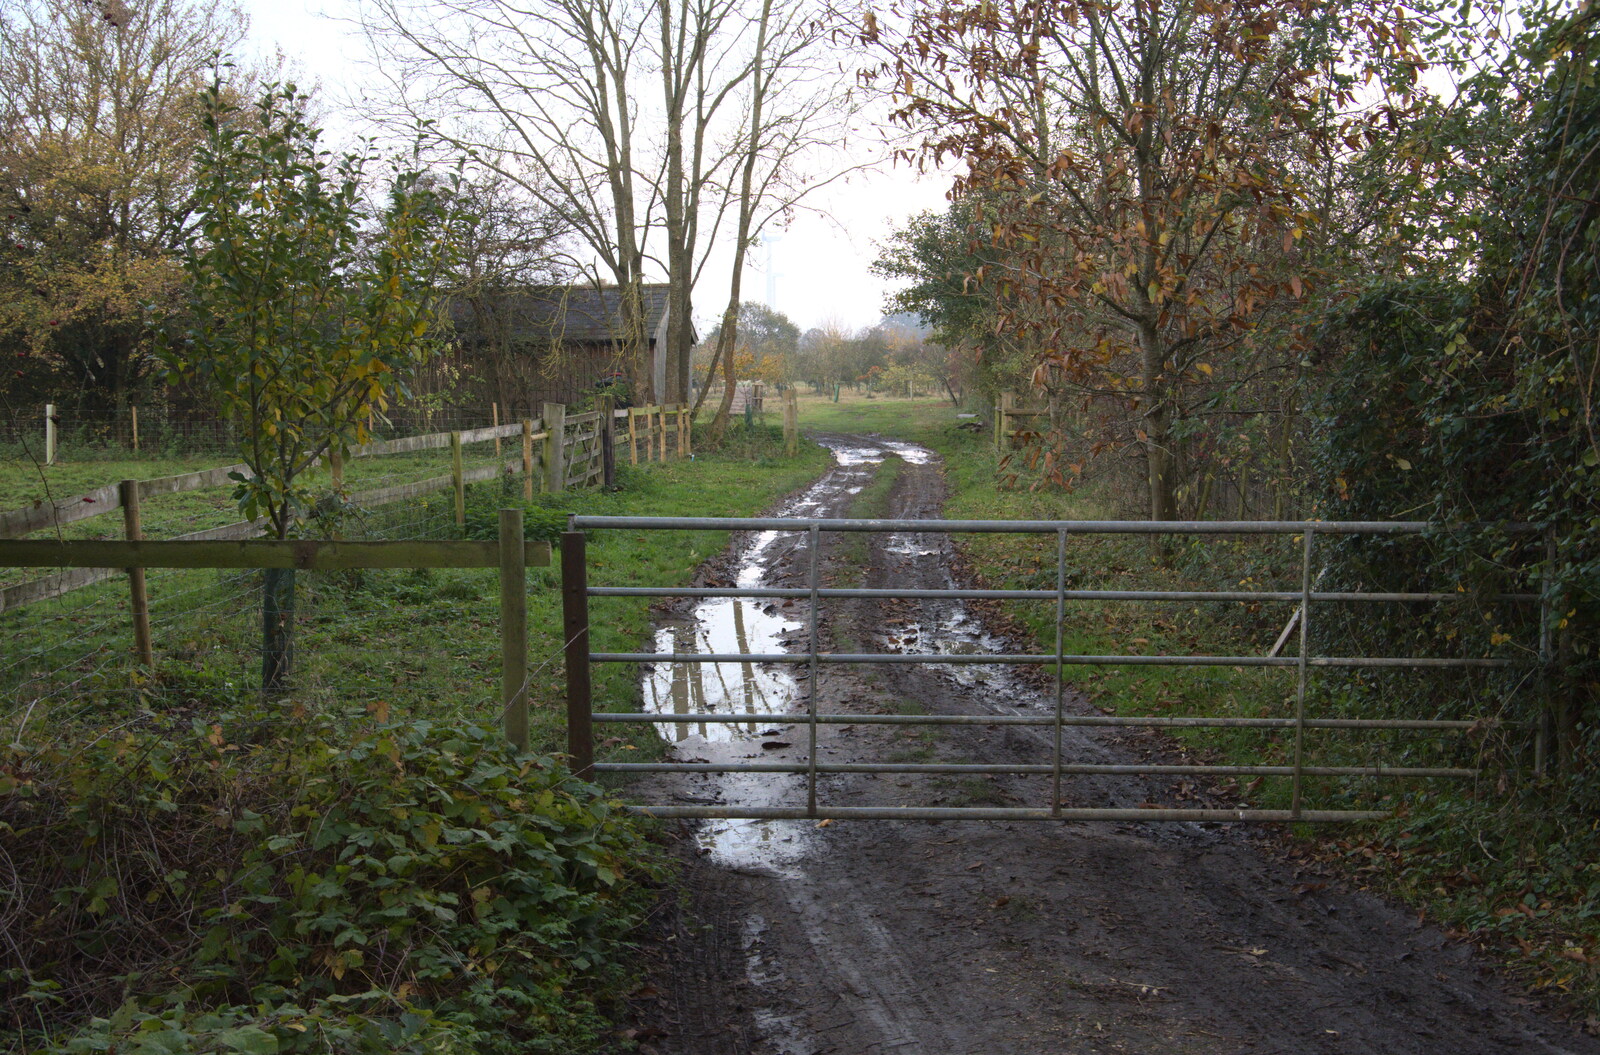 A gate and a muddy drive from To See the Hairy Pigs, Thrandeston, Suffolk - 7th November 2020